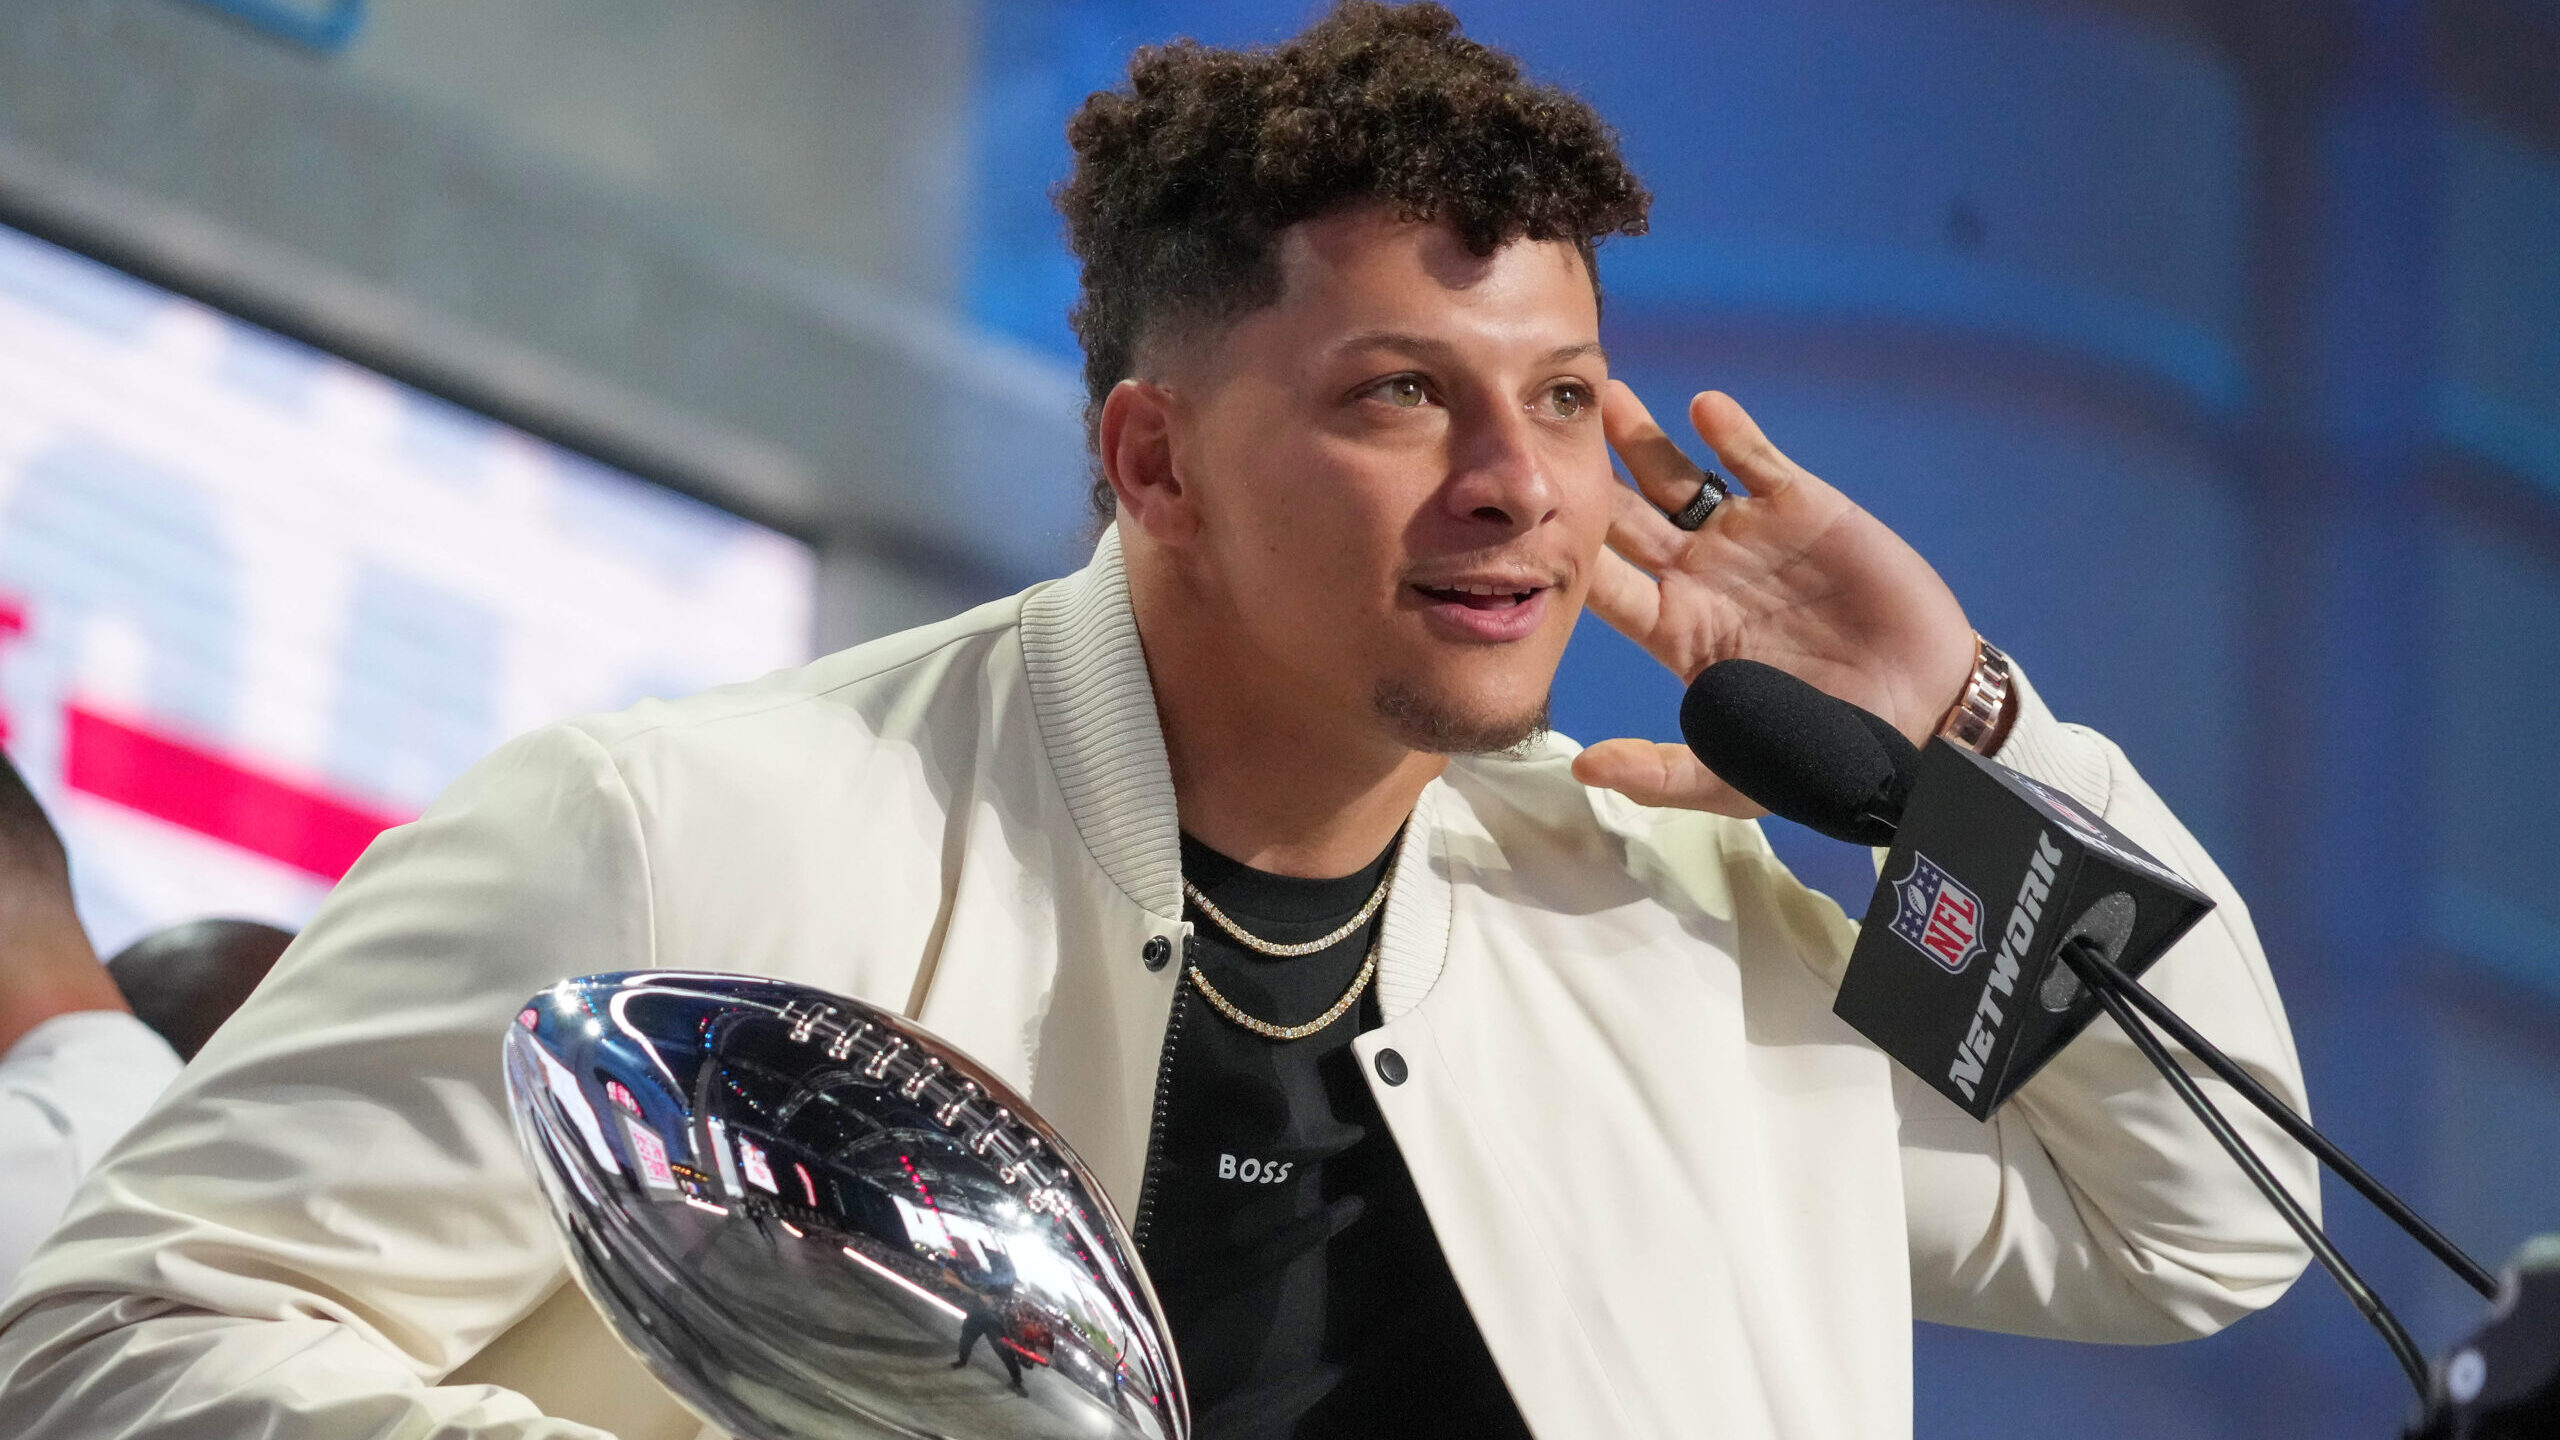 How, When Will Chiefs Make Patrick Mahomes NFL’s Highest-Paid QB?